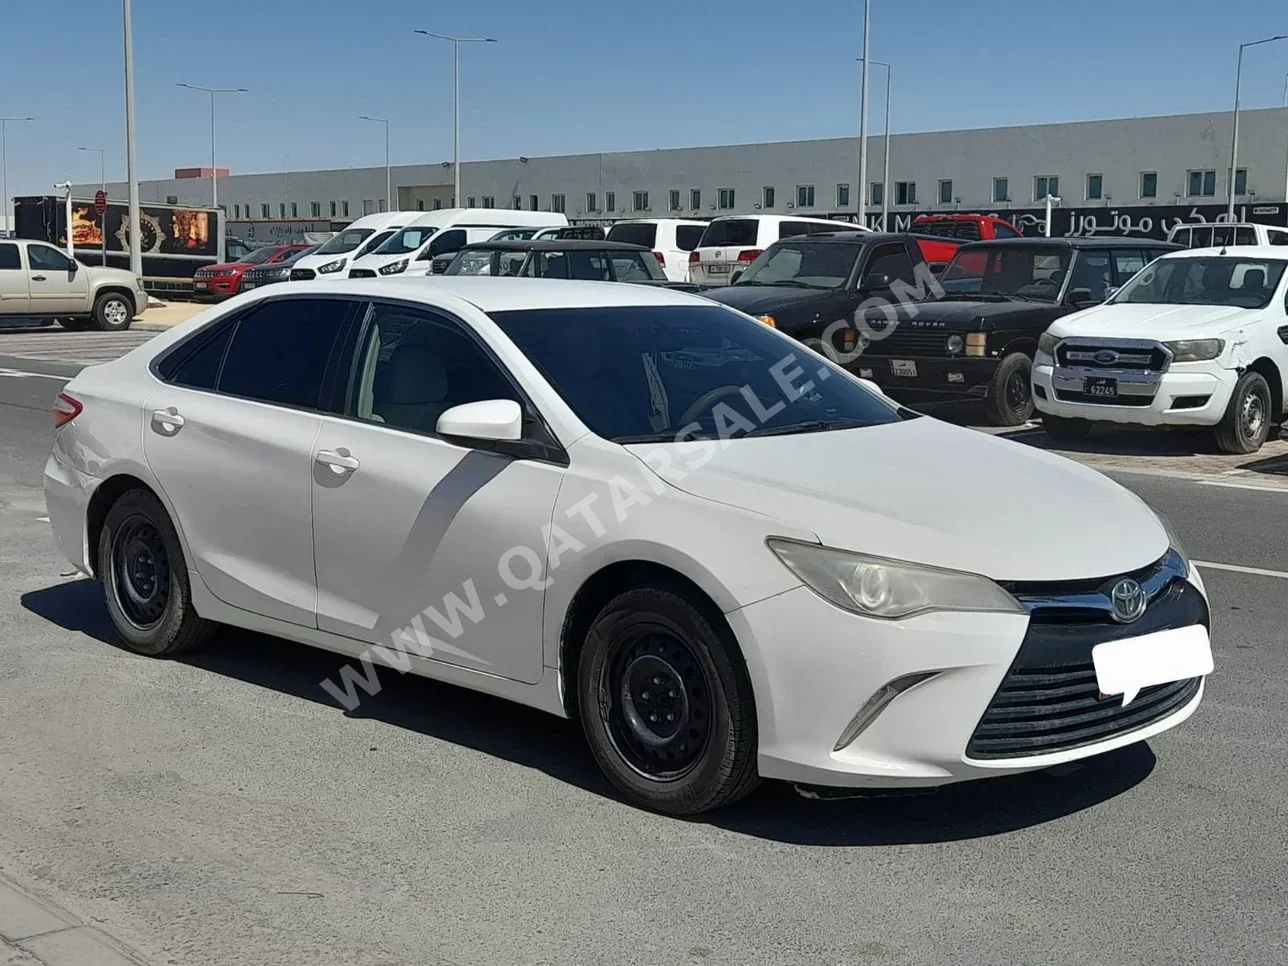 Toyota  Camry  LE  2017  Automatic  335,000 Km  4 Cylinder  Front Wheel Drive (FWD)  Sedan  White